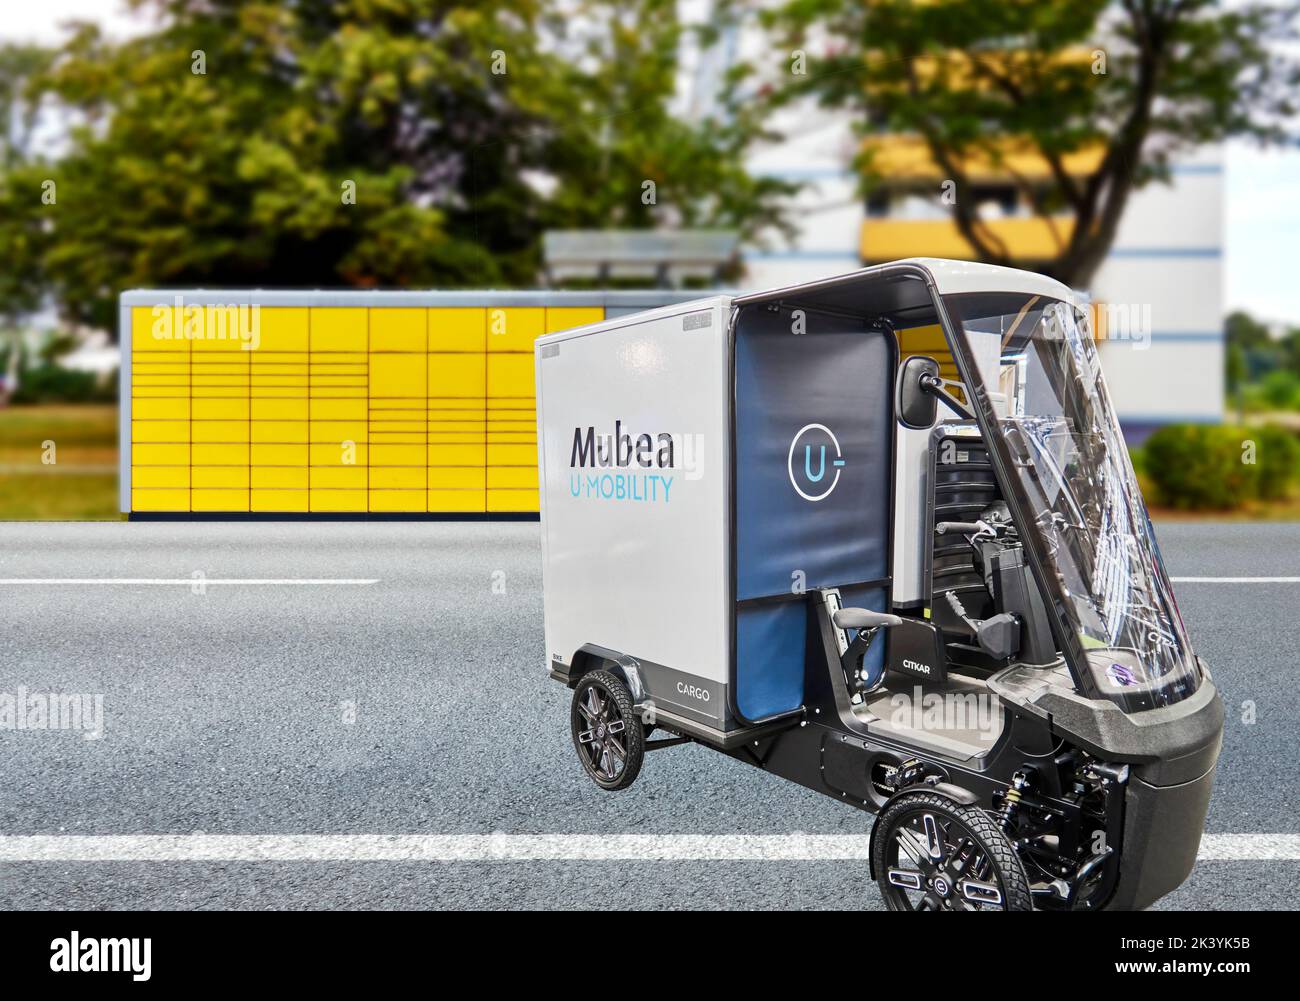 Mubea U-Mobility four-wheeled pedelec for clean transport of goods in the last mile, Hannover, Germany, September 24, 2022 Stock Photo